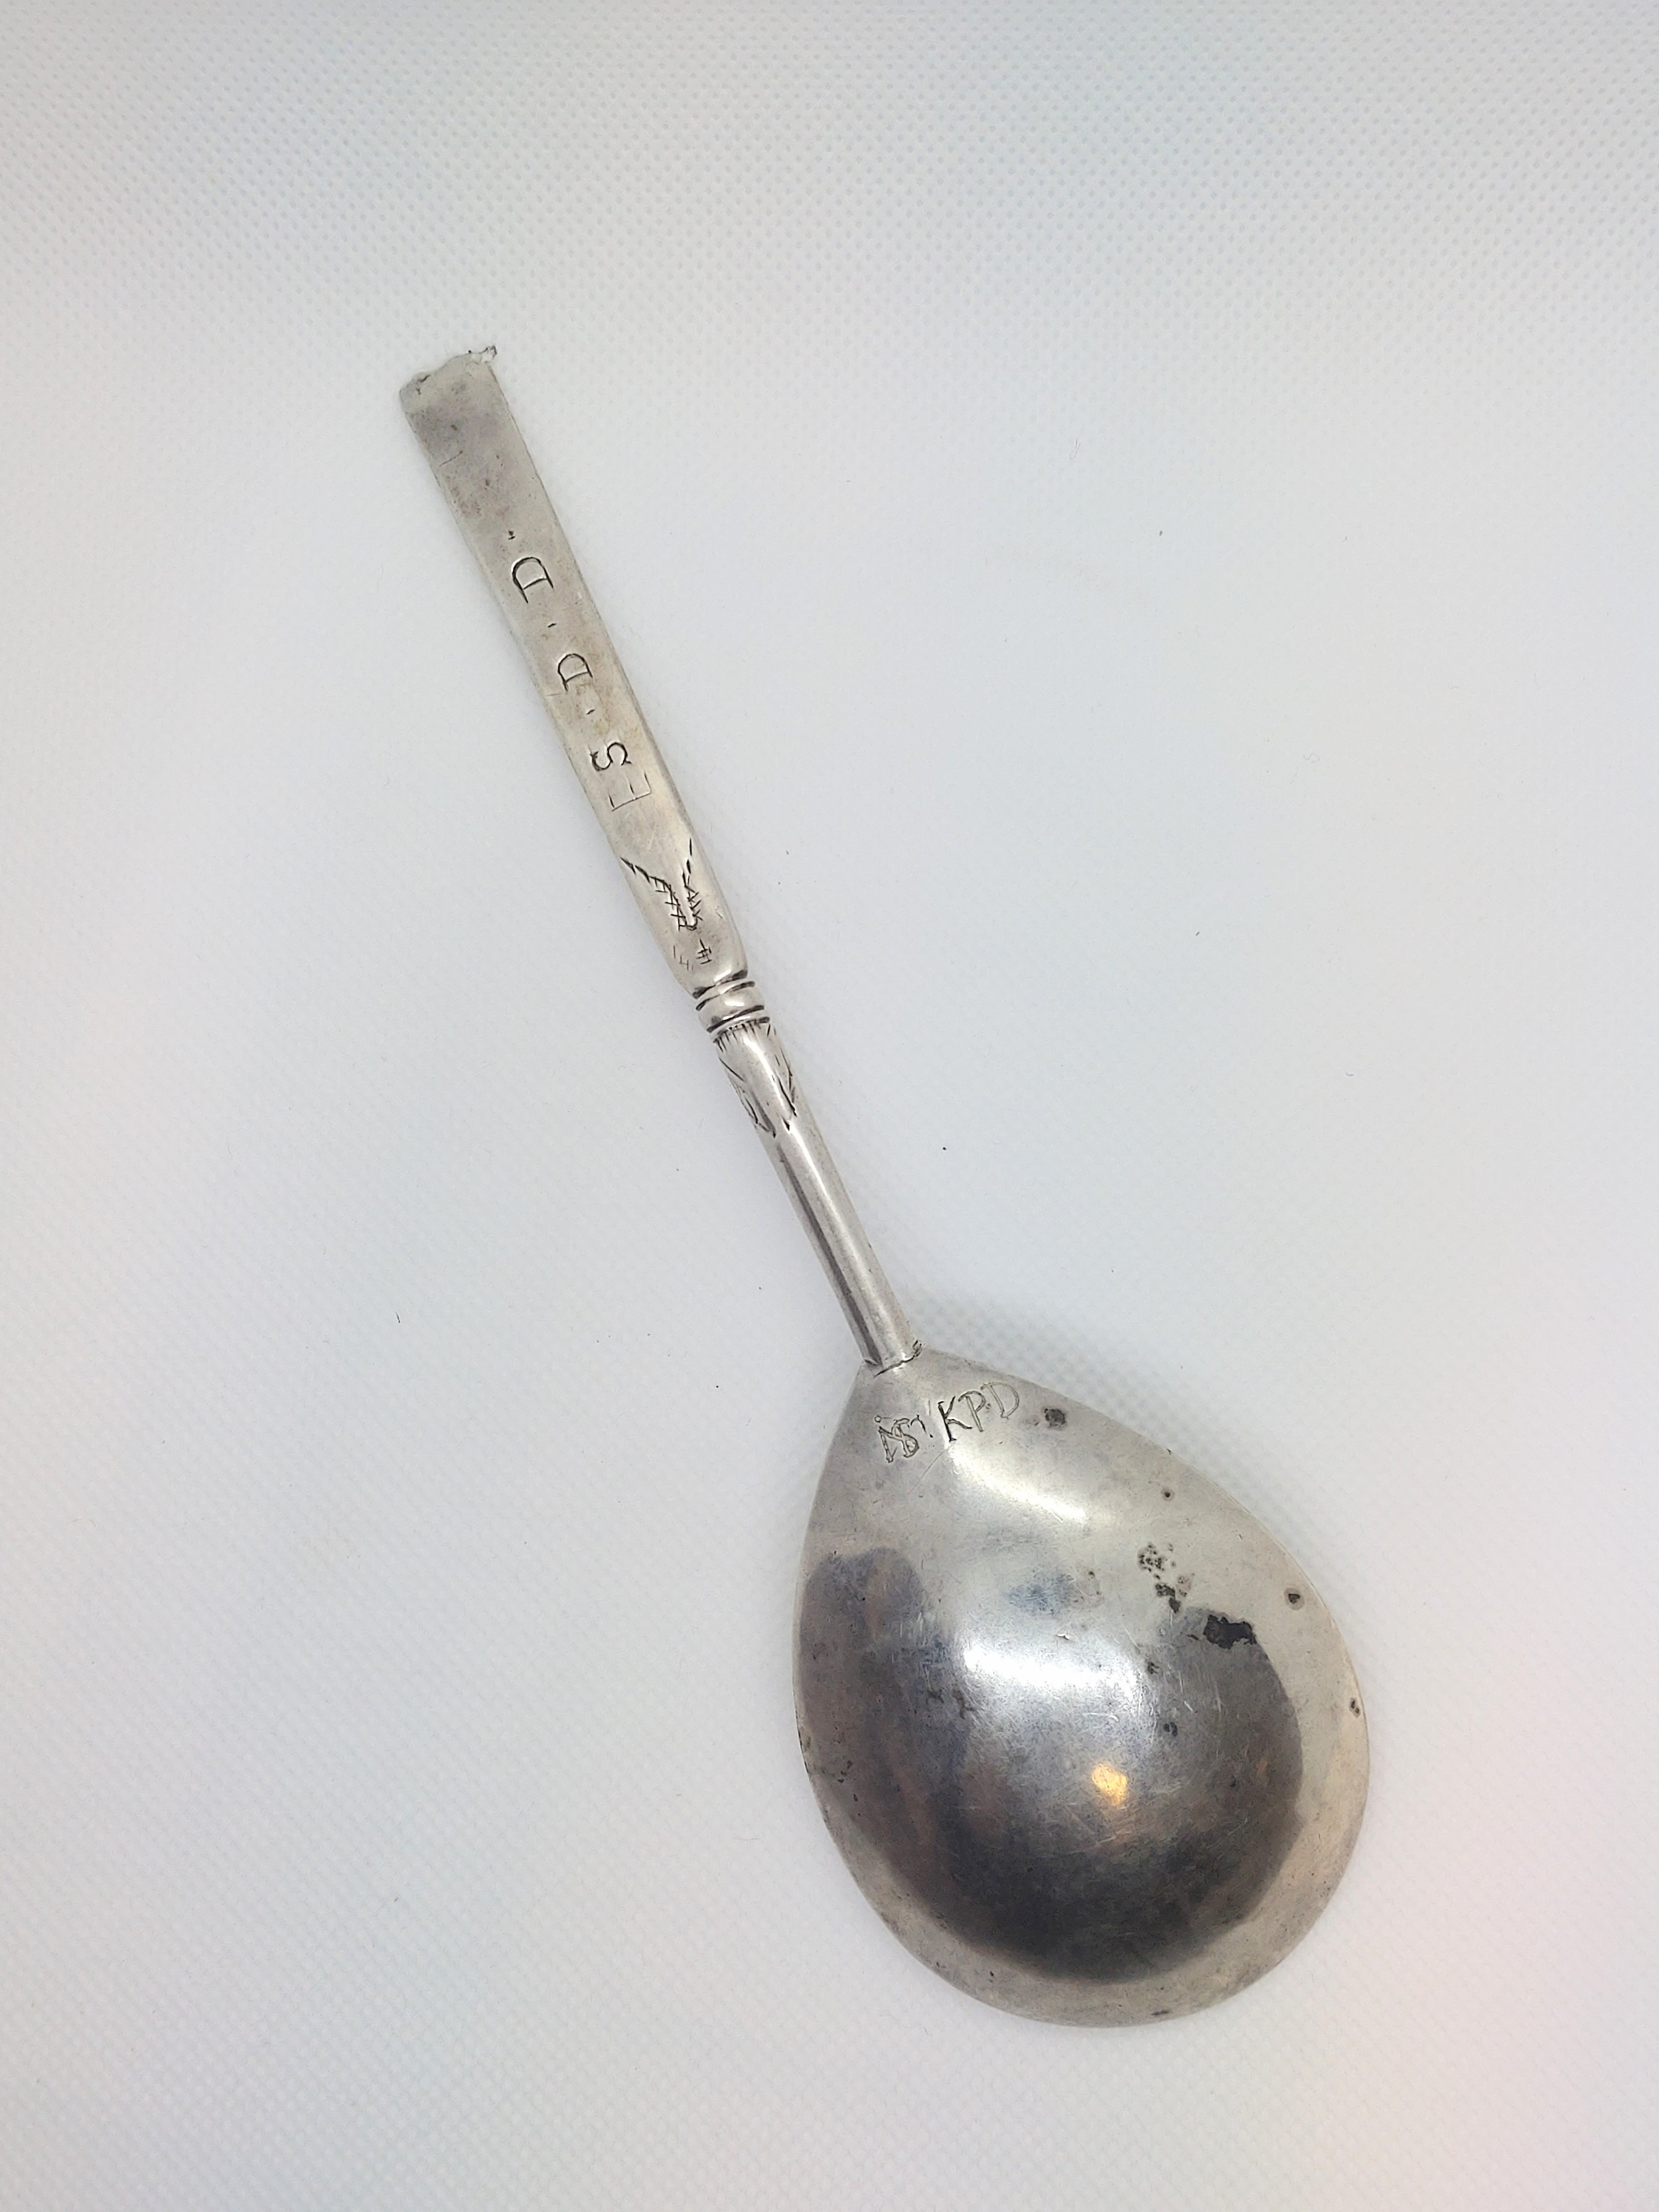 An 18th century Scandinavian silver spoon engraved with scrolling foliage and groups of initials. - Image 2 of 2